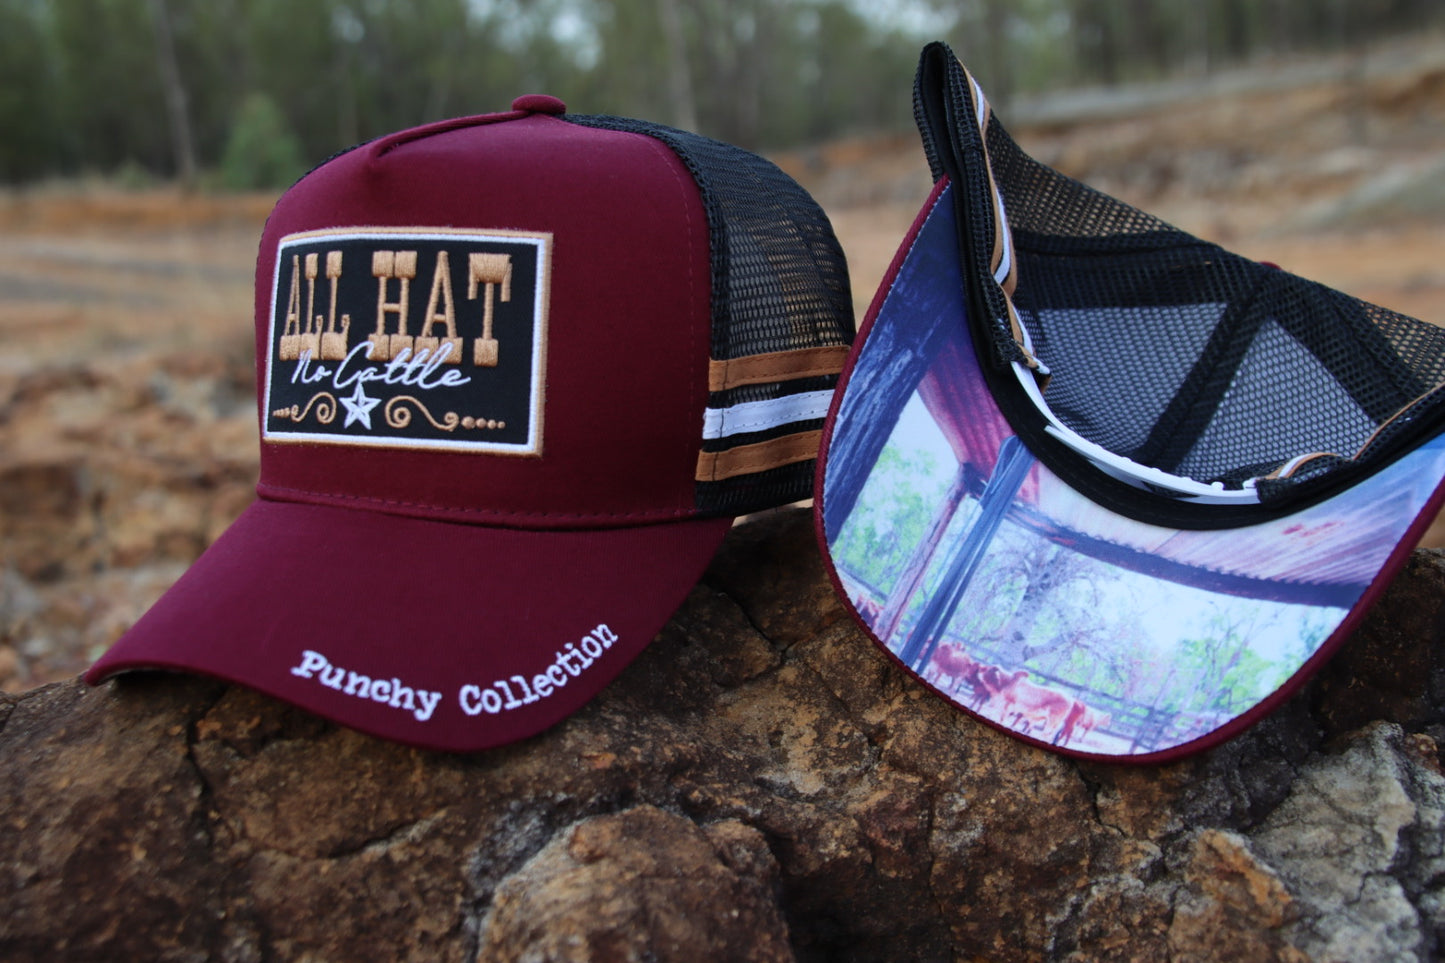 Punchy Collection - “All Hat” Maroon